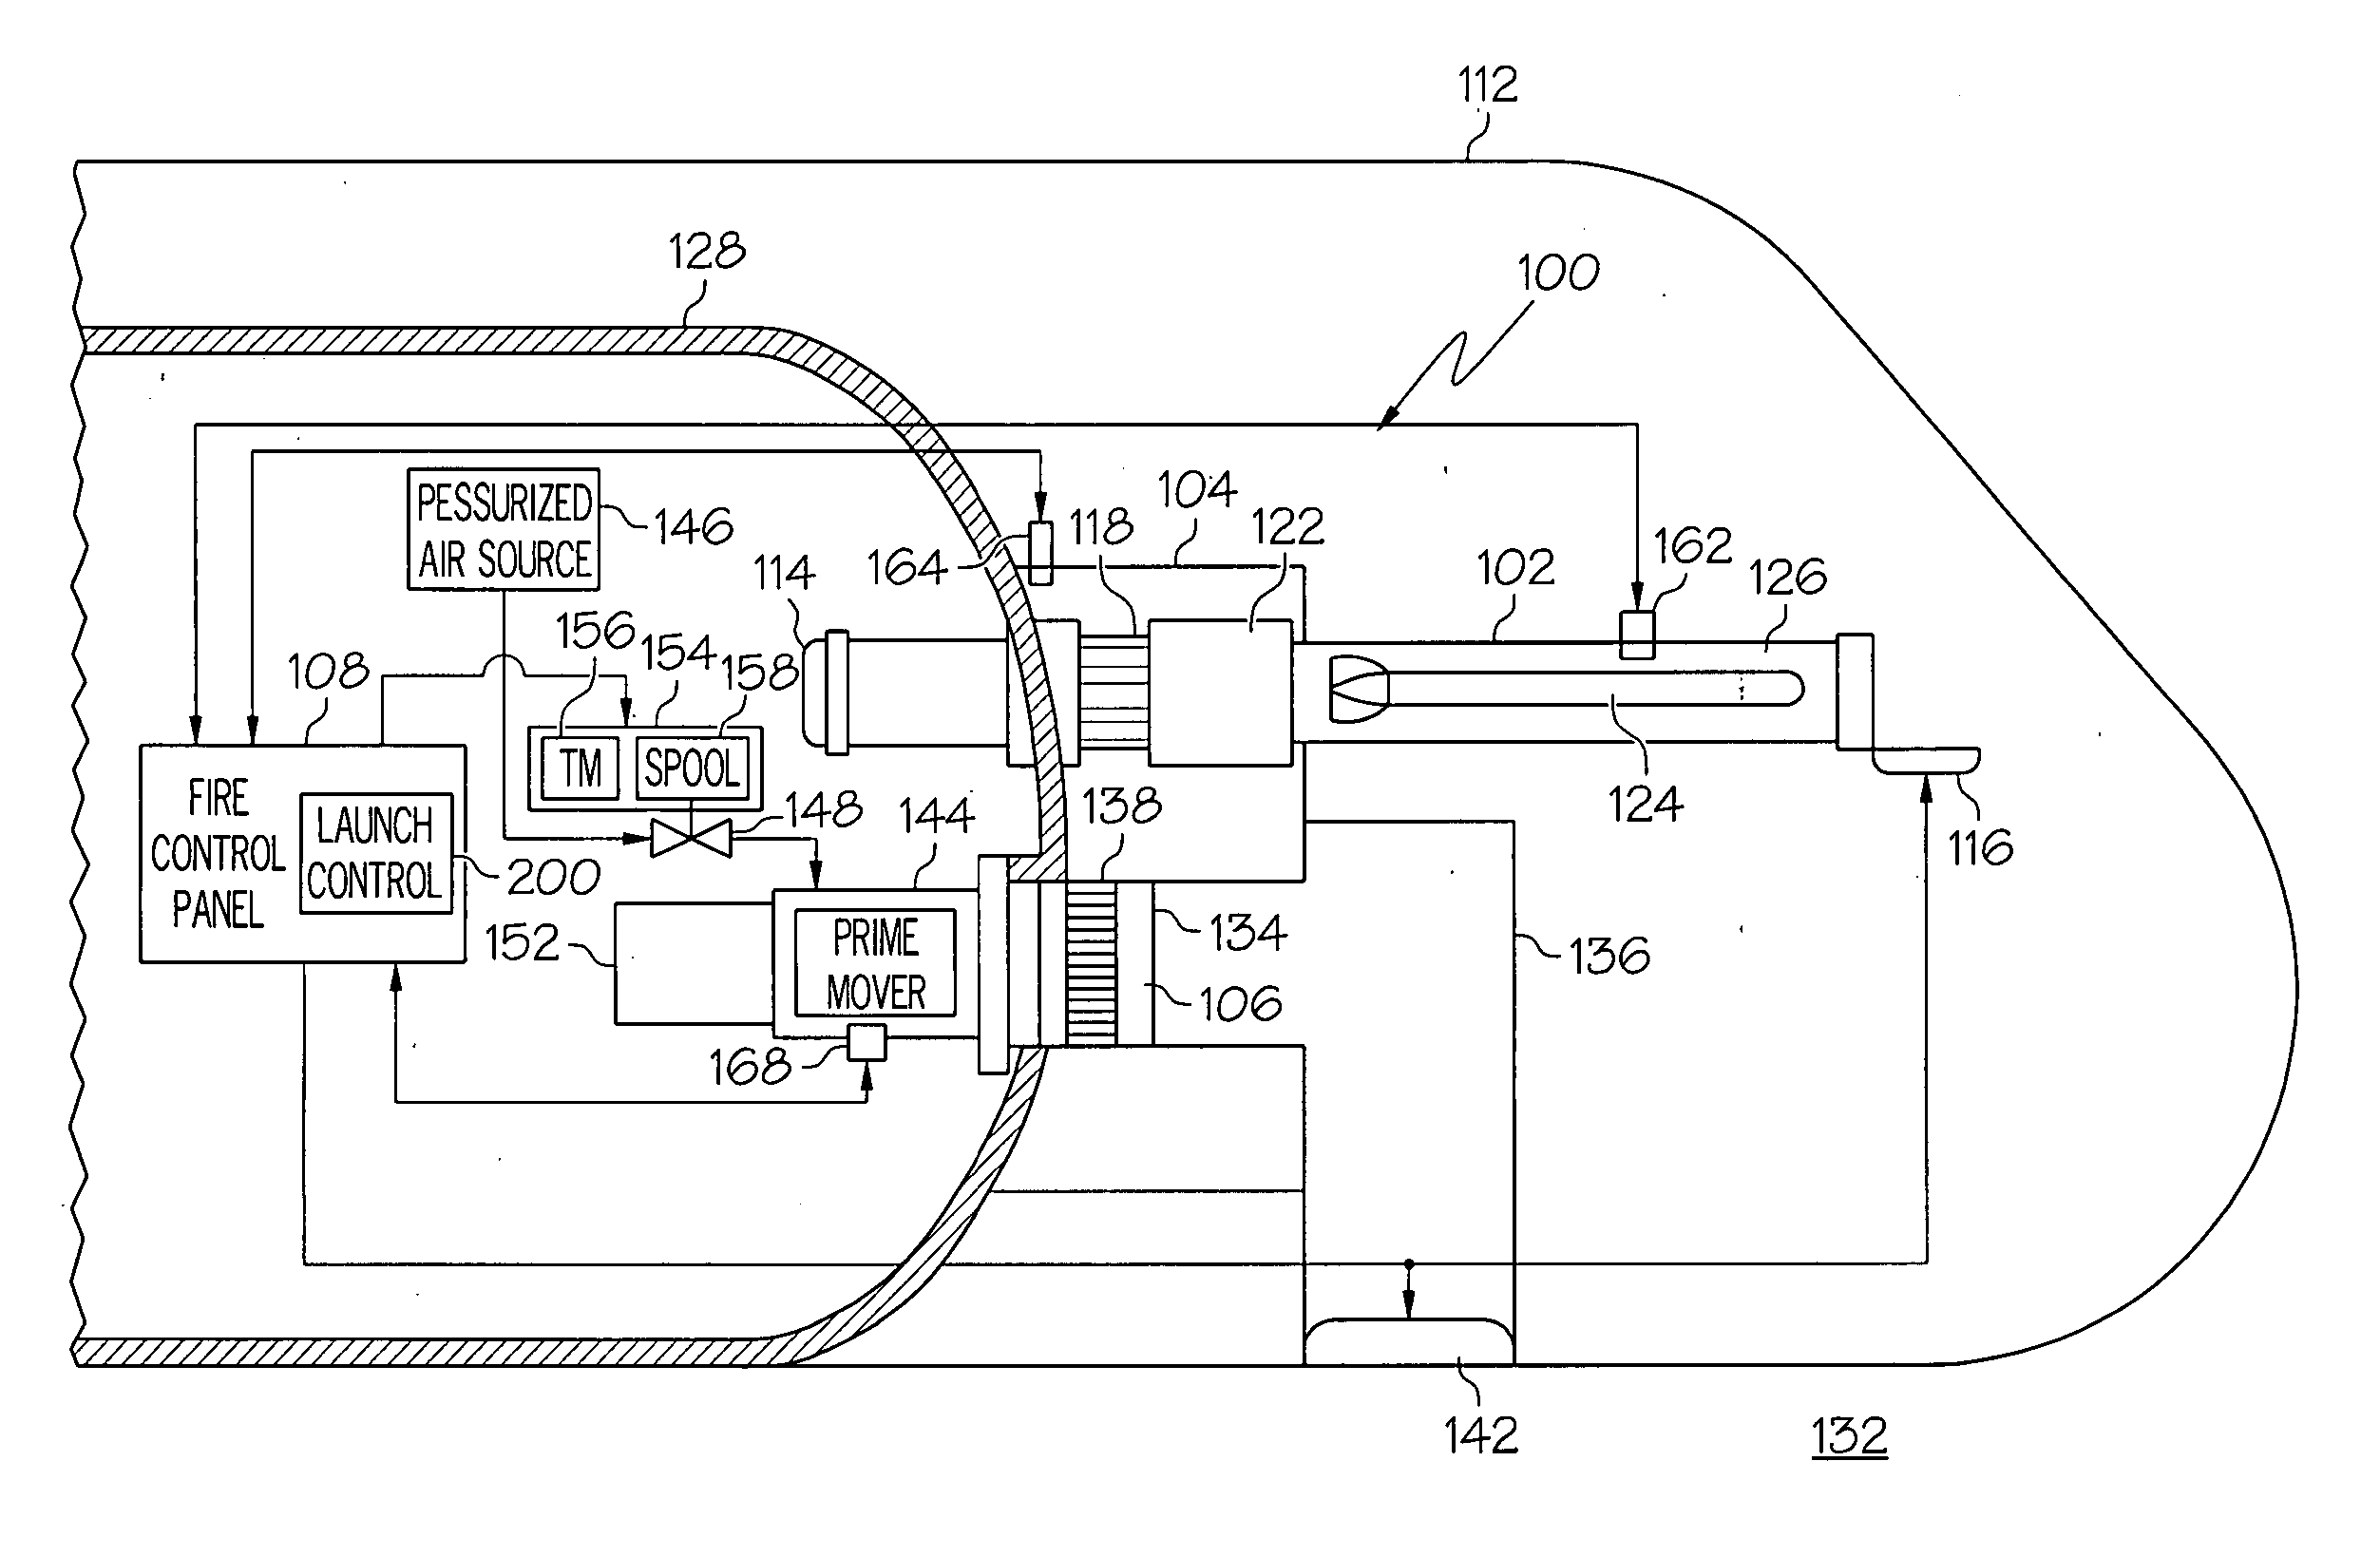 Submarine ejection optimization control system and method